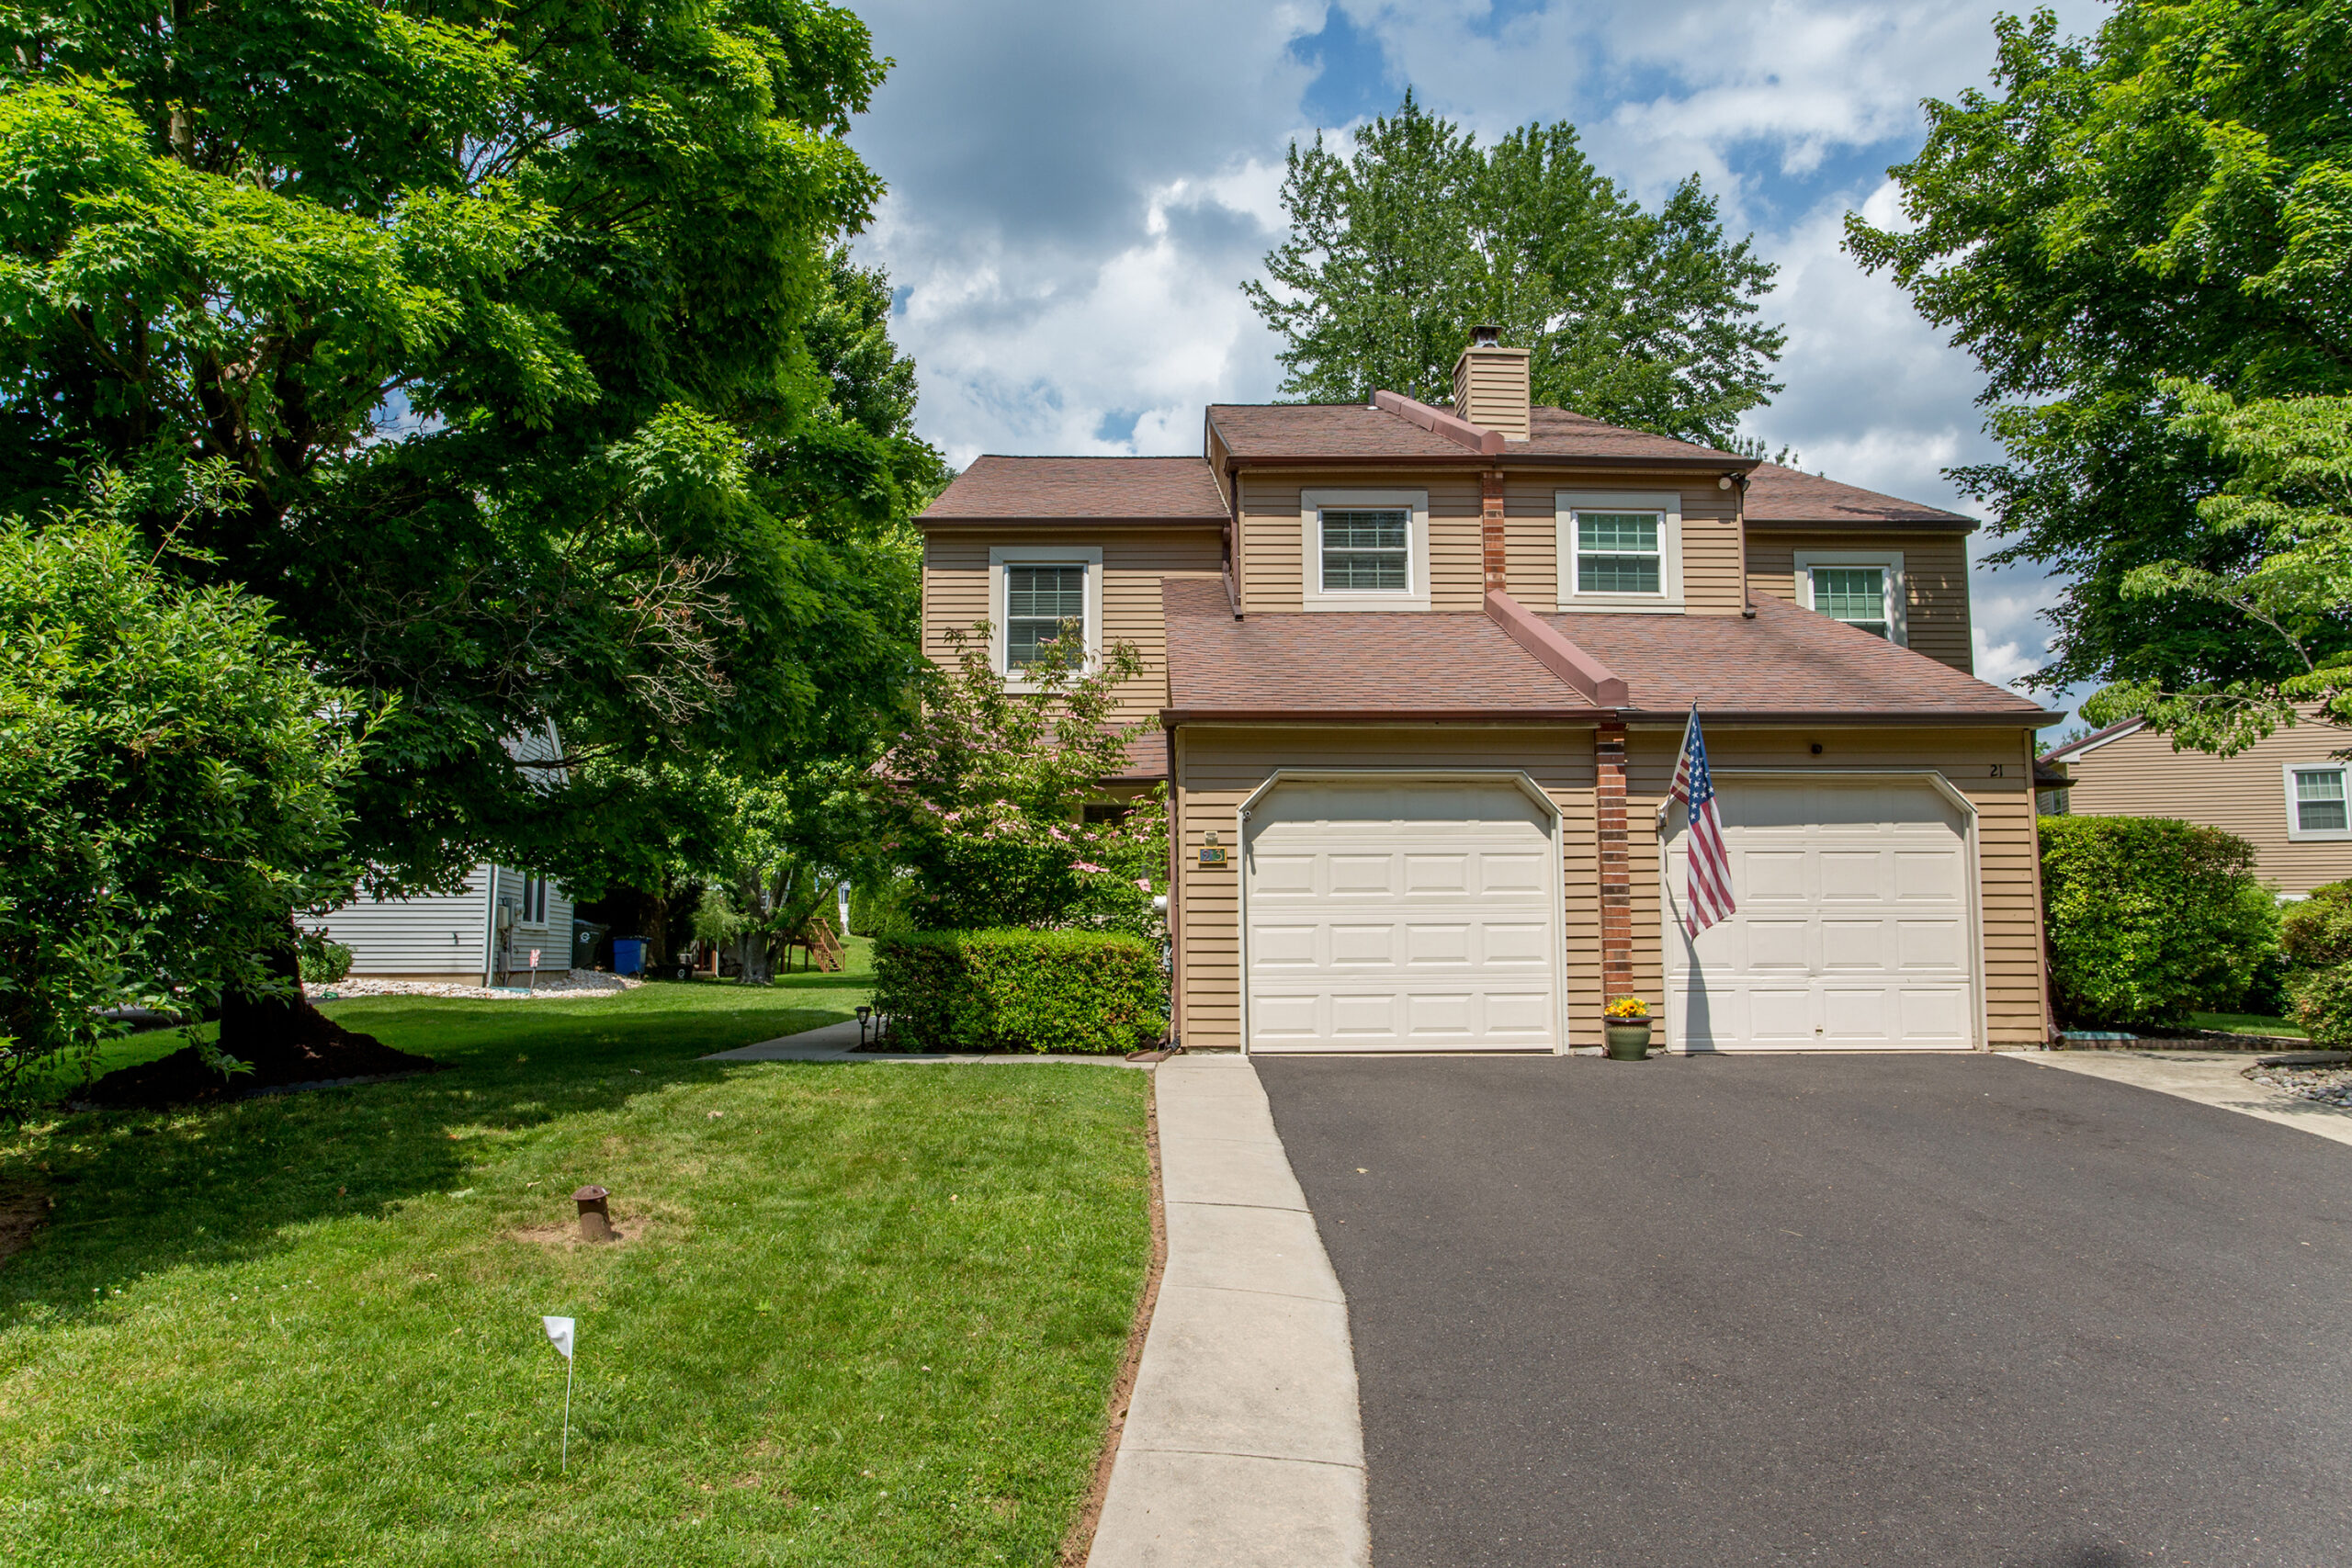 23 Stacey Dr
Doylestown, PA